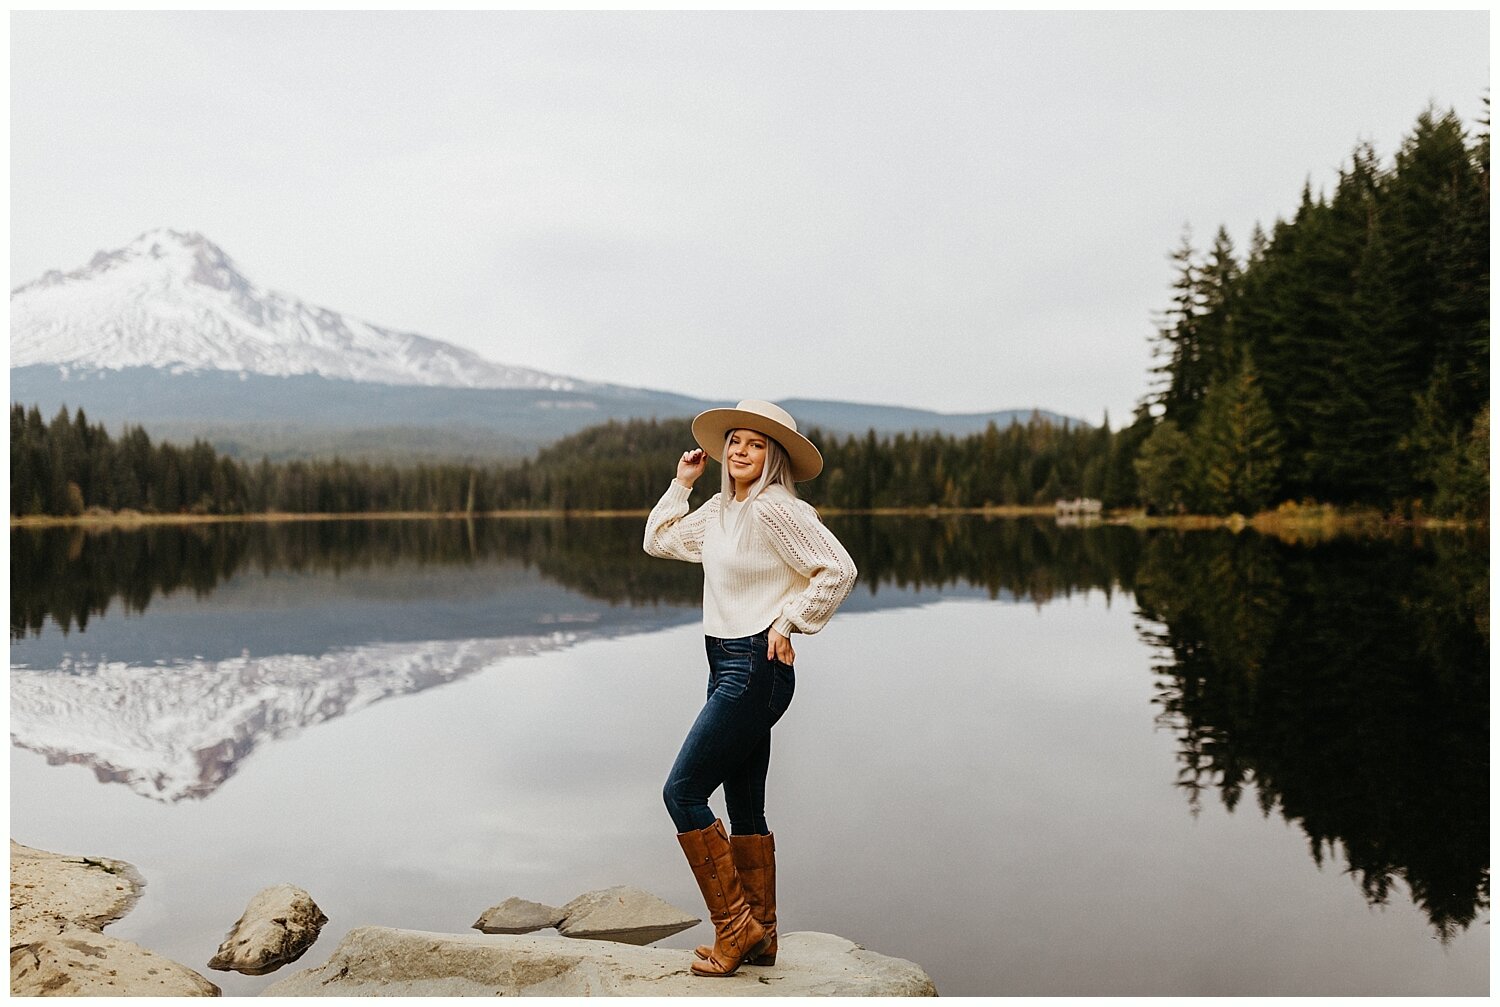  Senior portraits in front of Trillium Lake and Mt. Hood. 